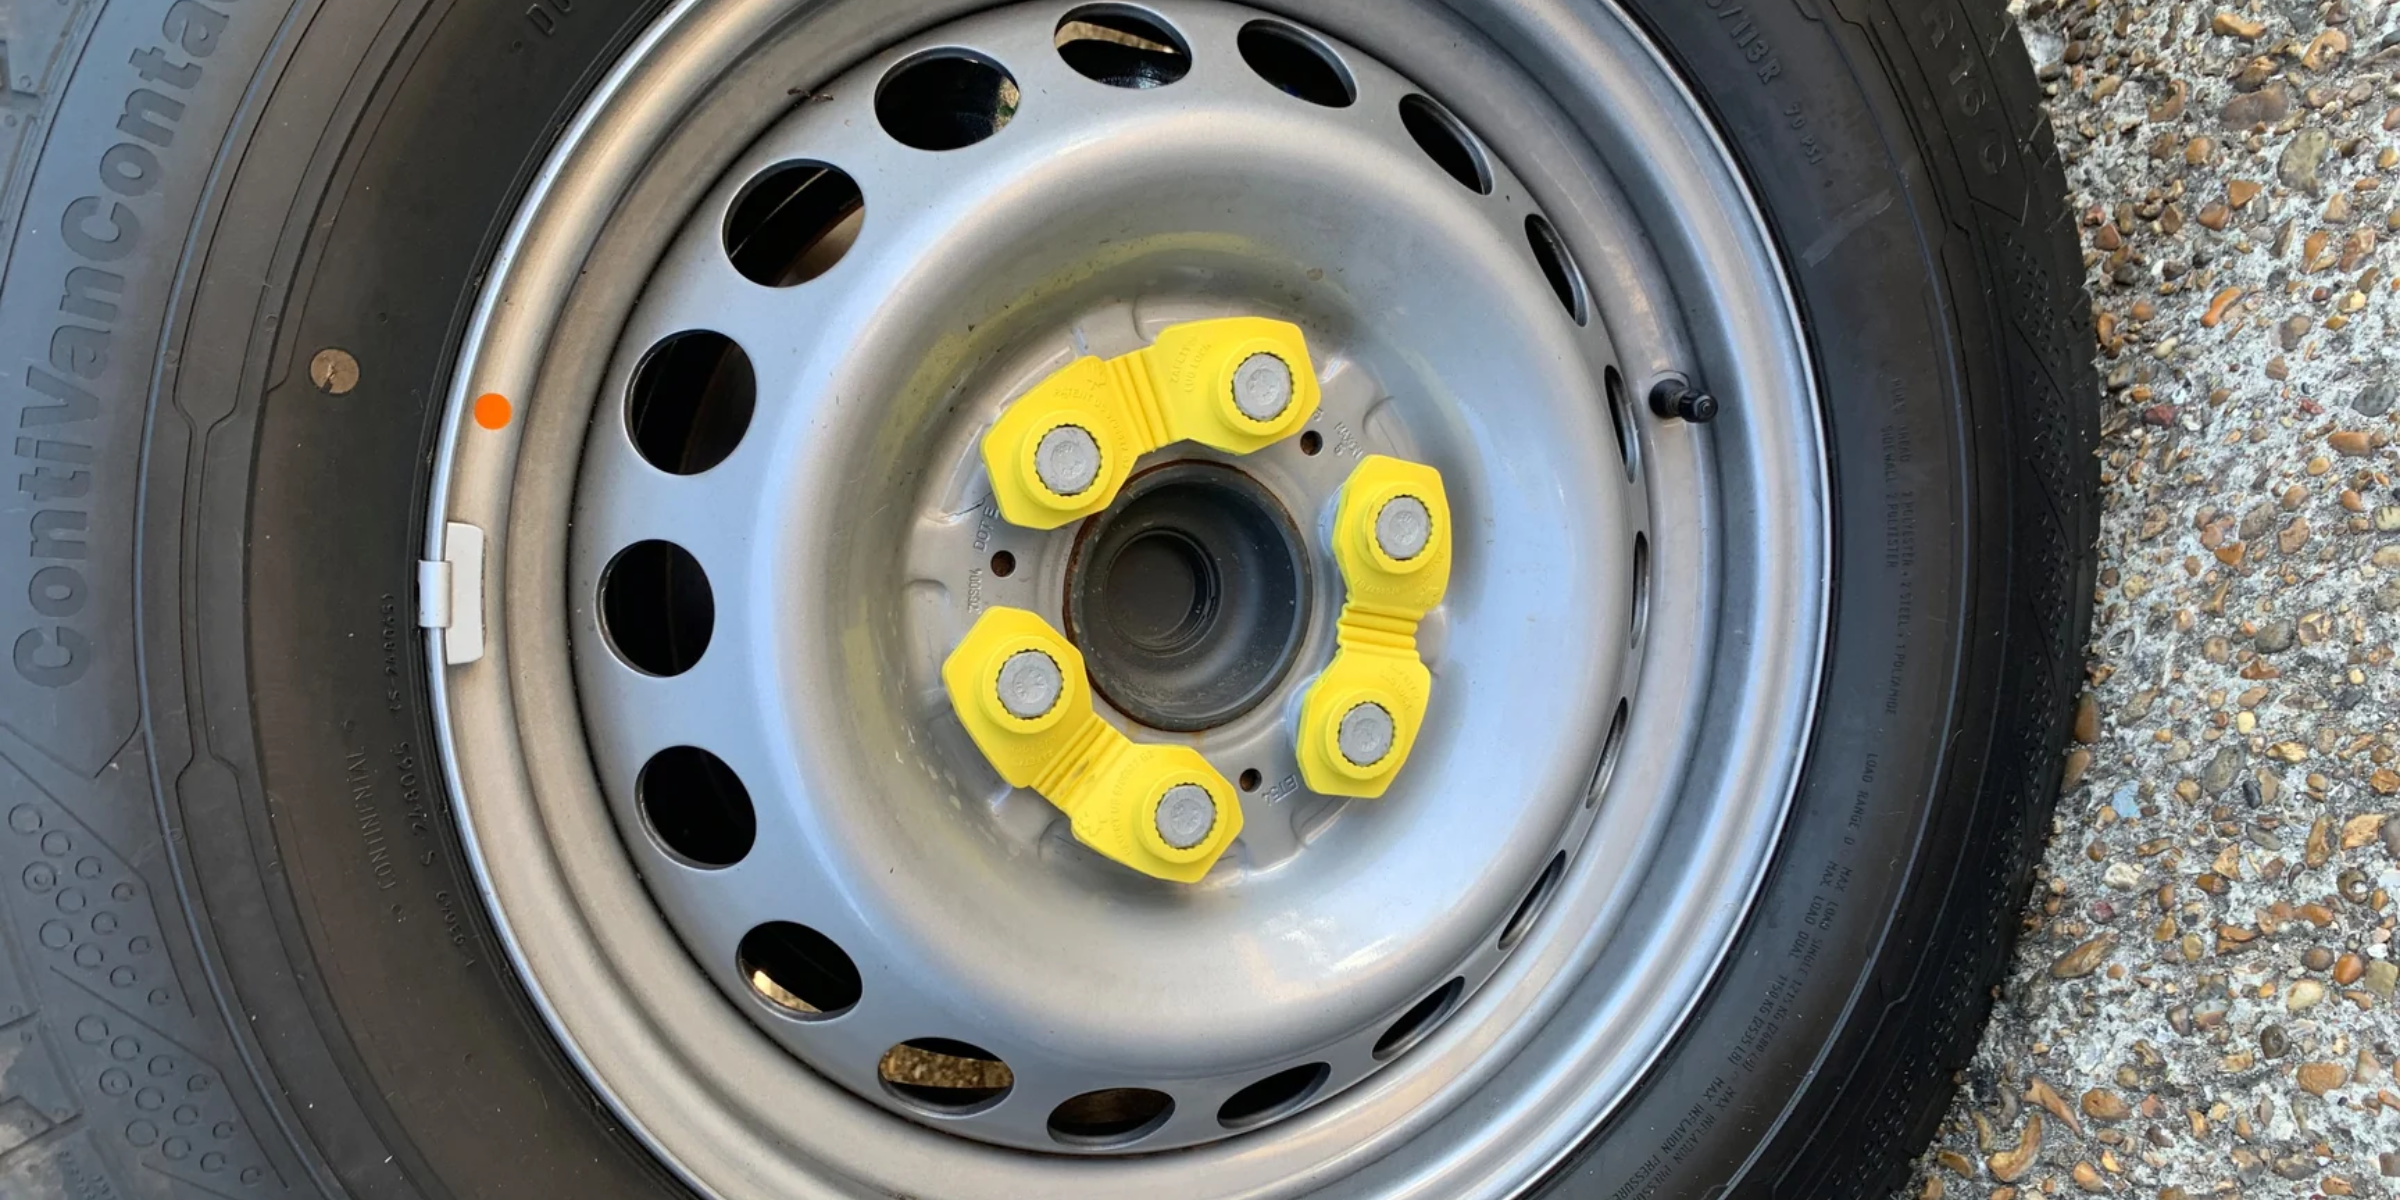 HGV wheel with Zafety Lug Locks attached